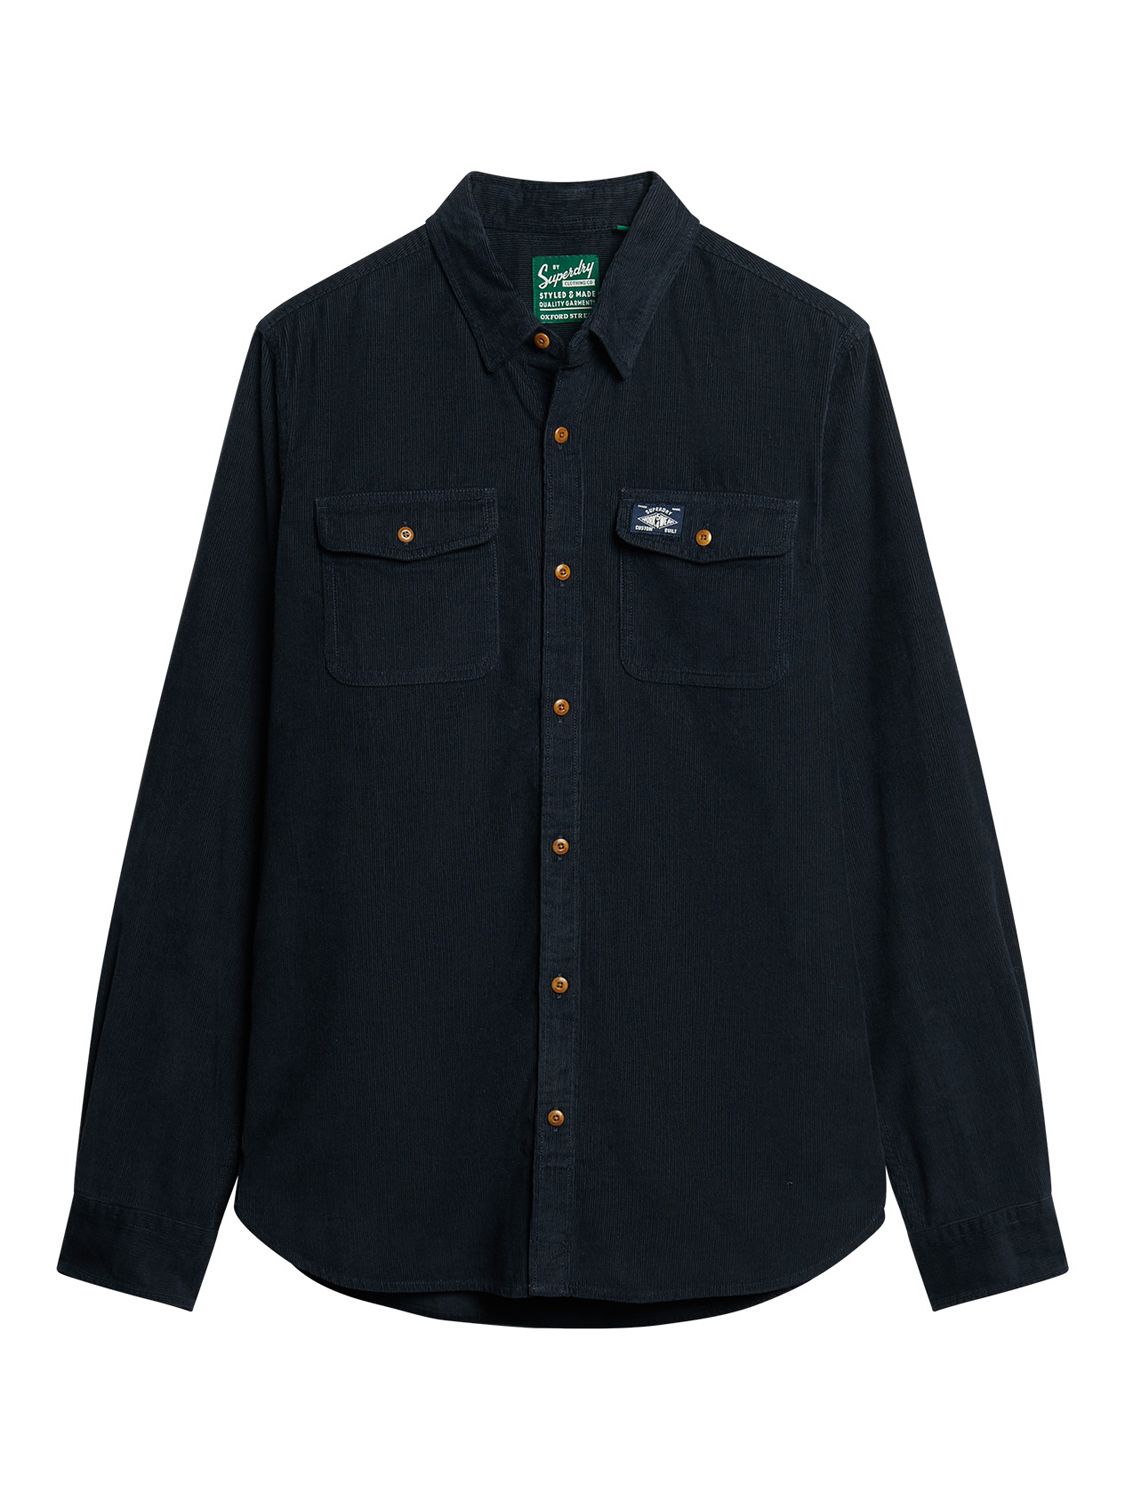 Buy Superdry Trailsman Relaxed Fit Corduroy Shirt Online at johnlewis.com